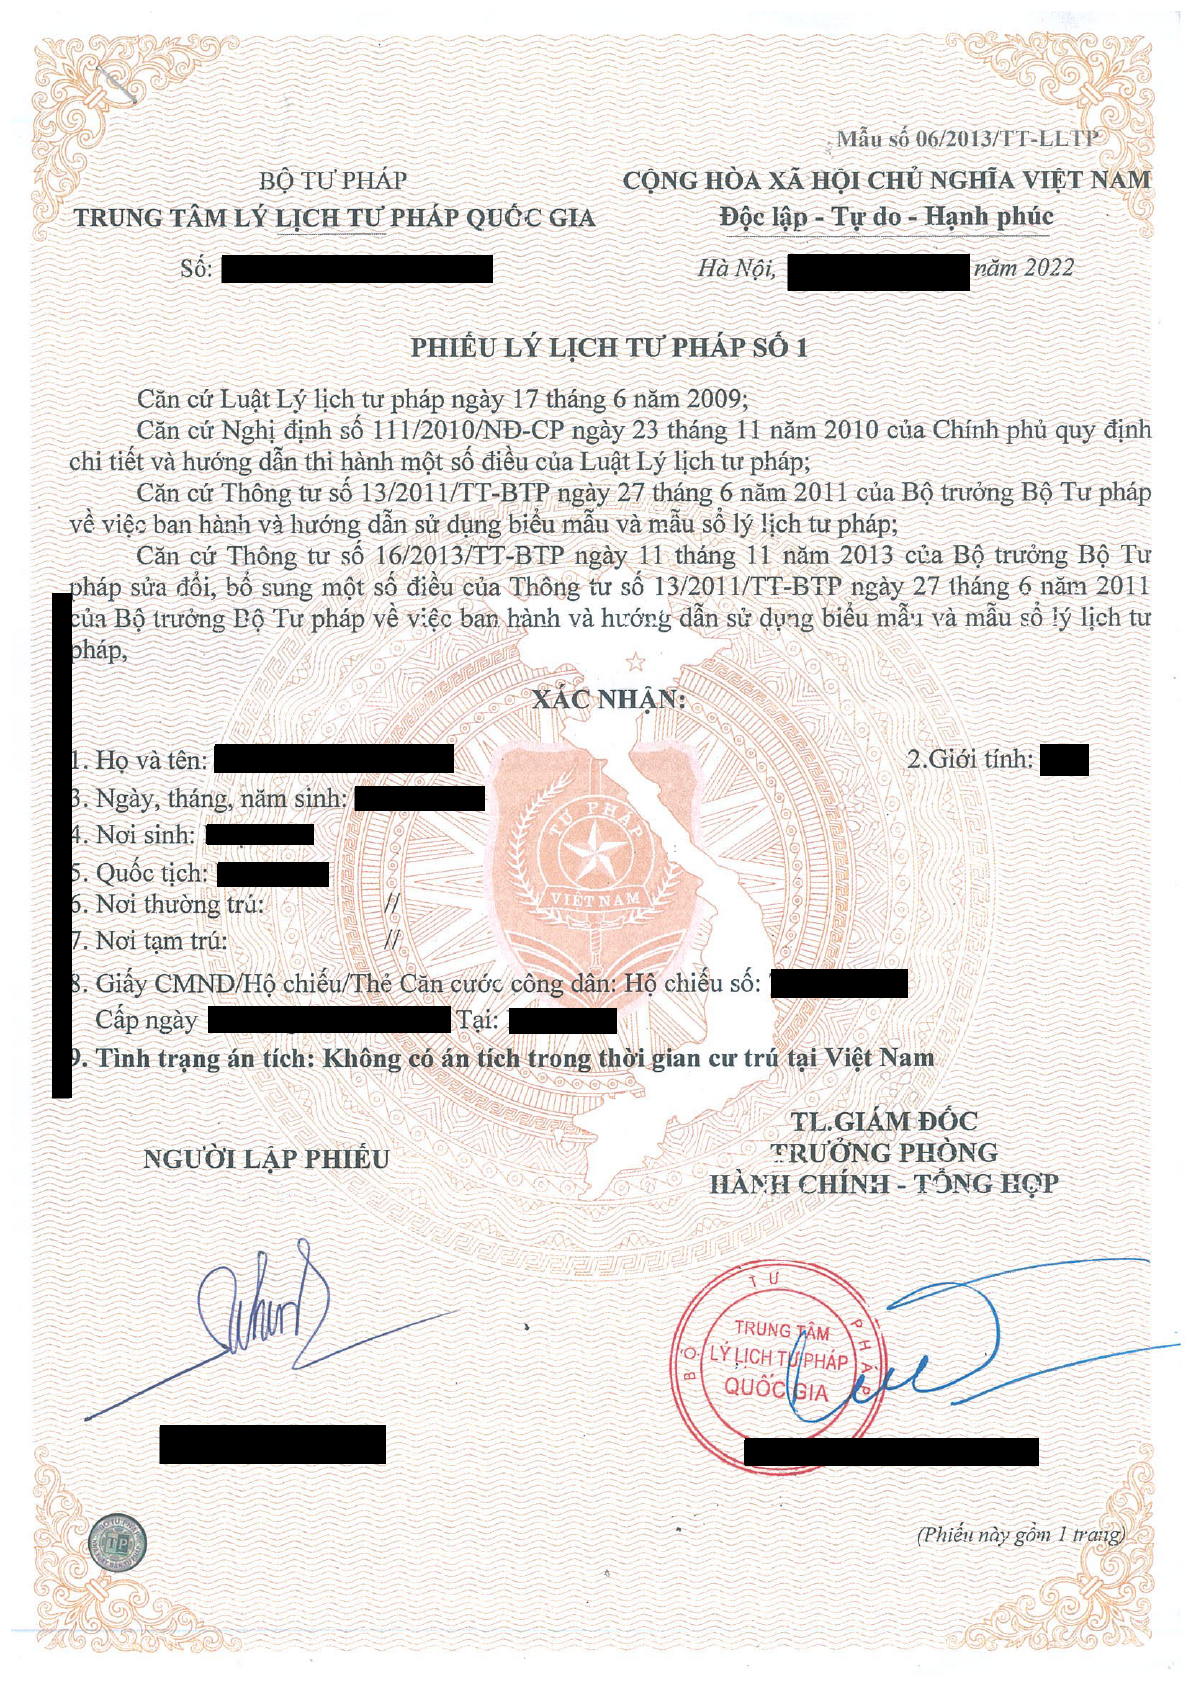 Certificate of Criminal Records issued by the Vietnamese Authority, CUTBELL International Legal Affairs Office.png